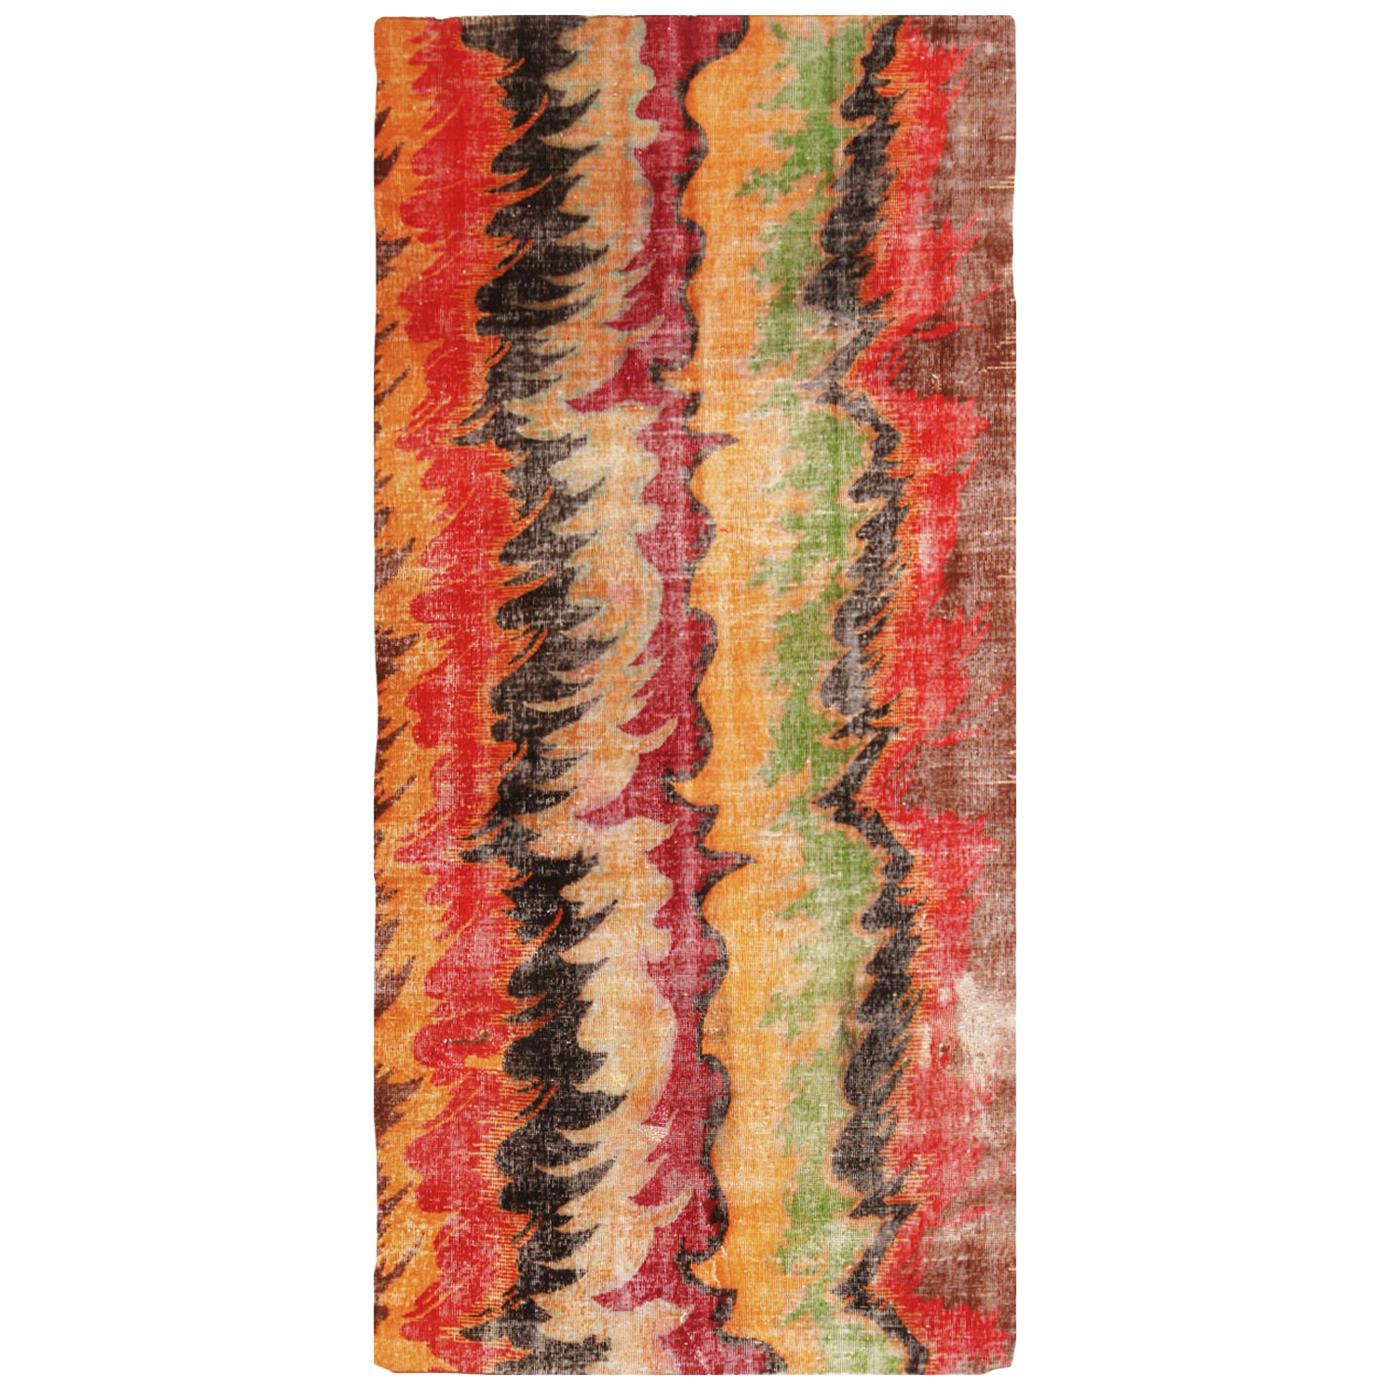 Rug & Kilim's Contemporary Geometric Red and Yellow Multi-Color Wool Rug